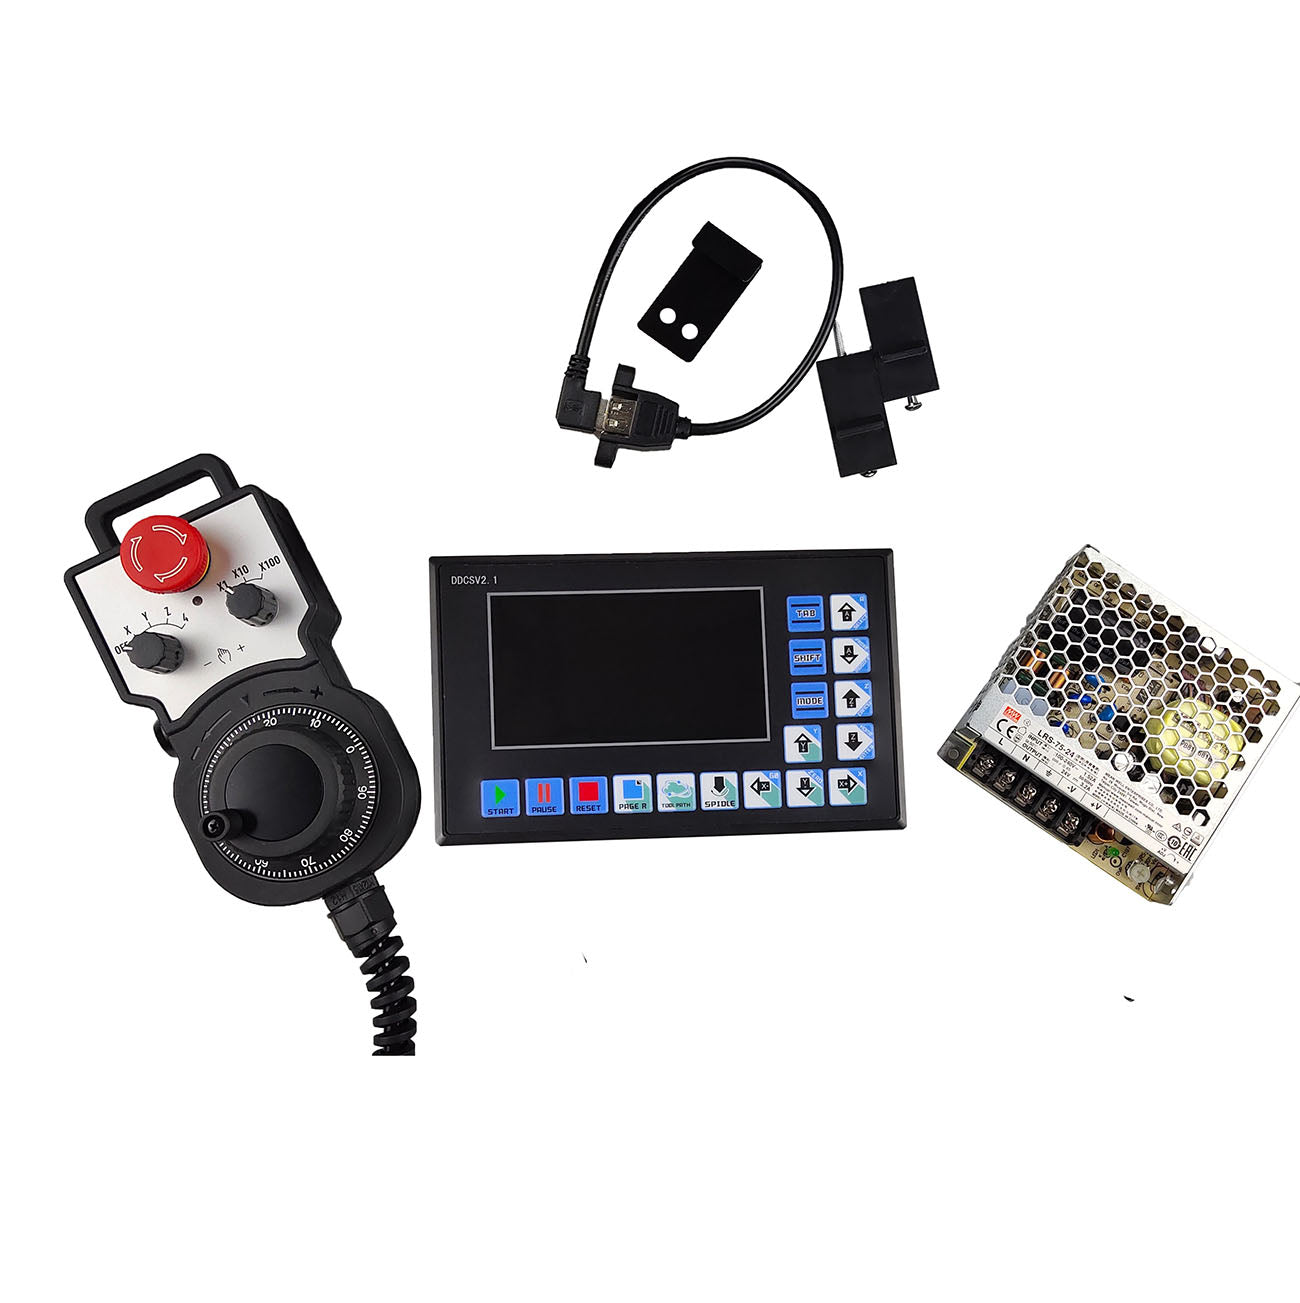 4-axis cnc motion controller cnc kit controller + handwheel + DC power supply support G code Support U disk read